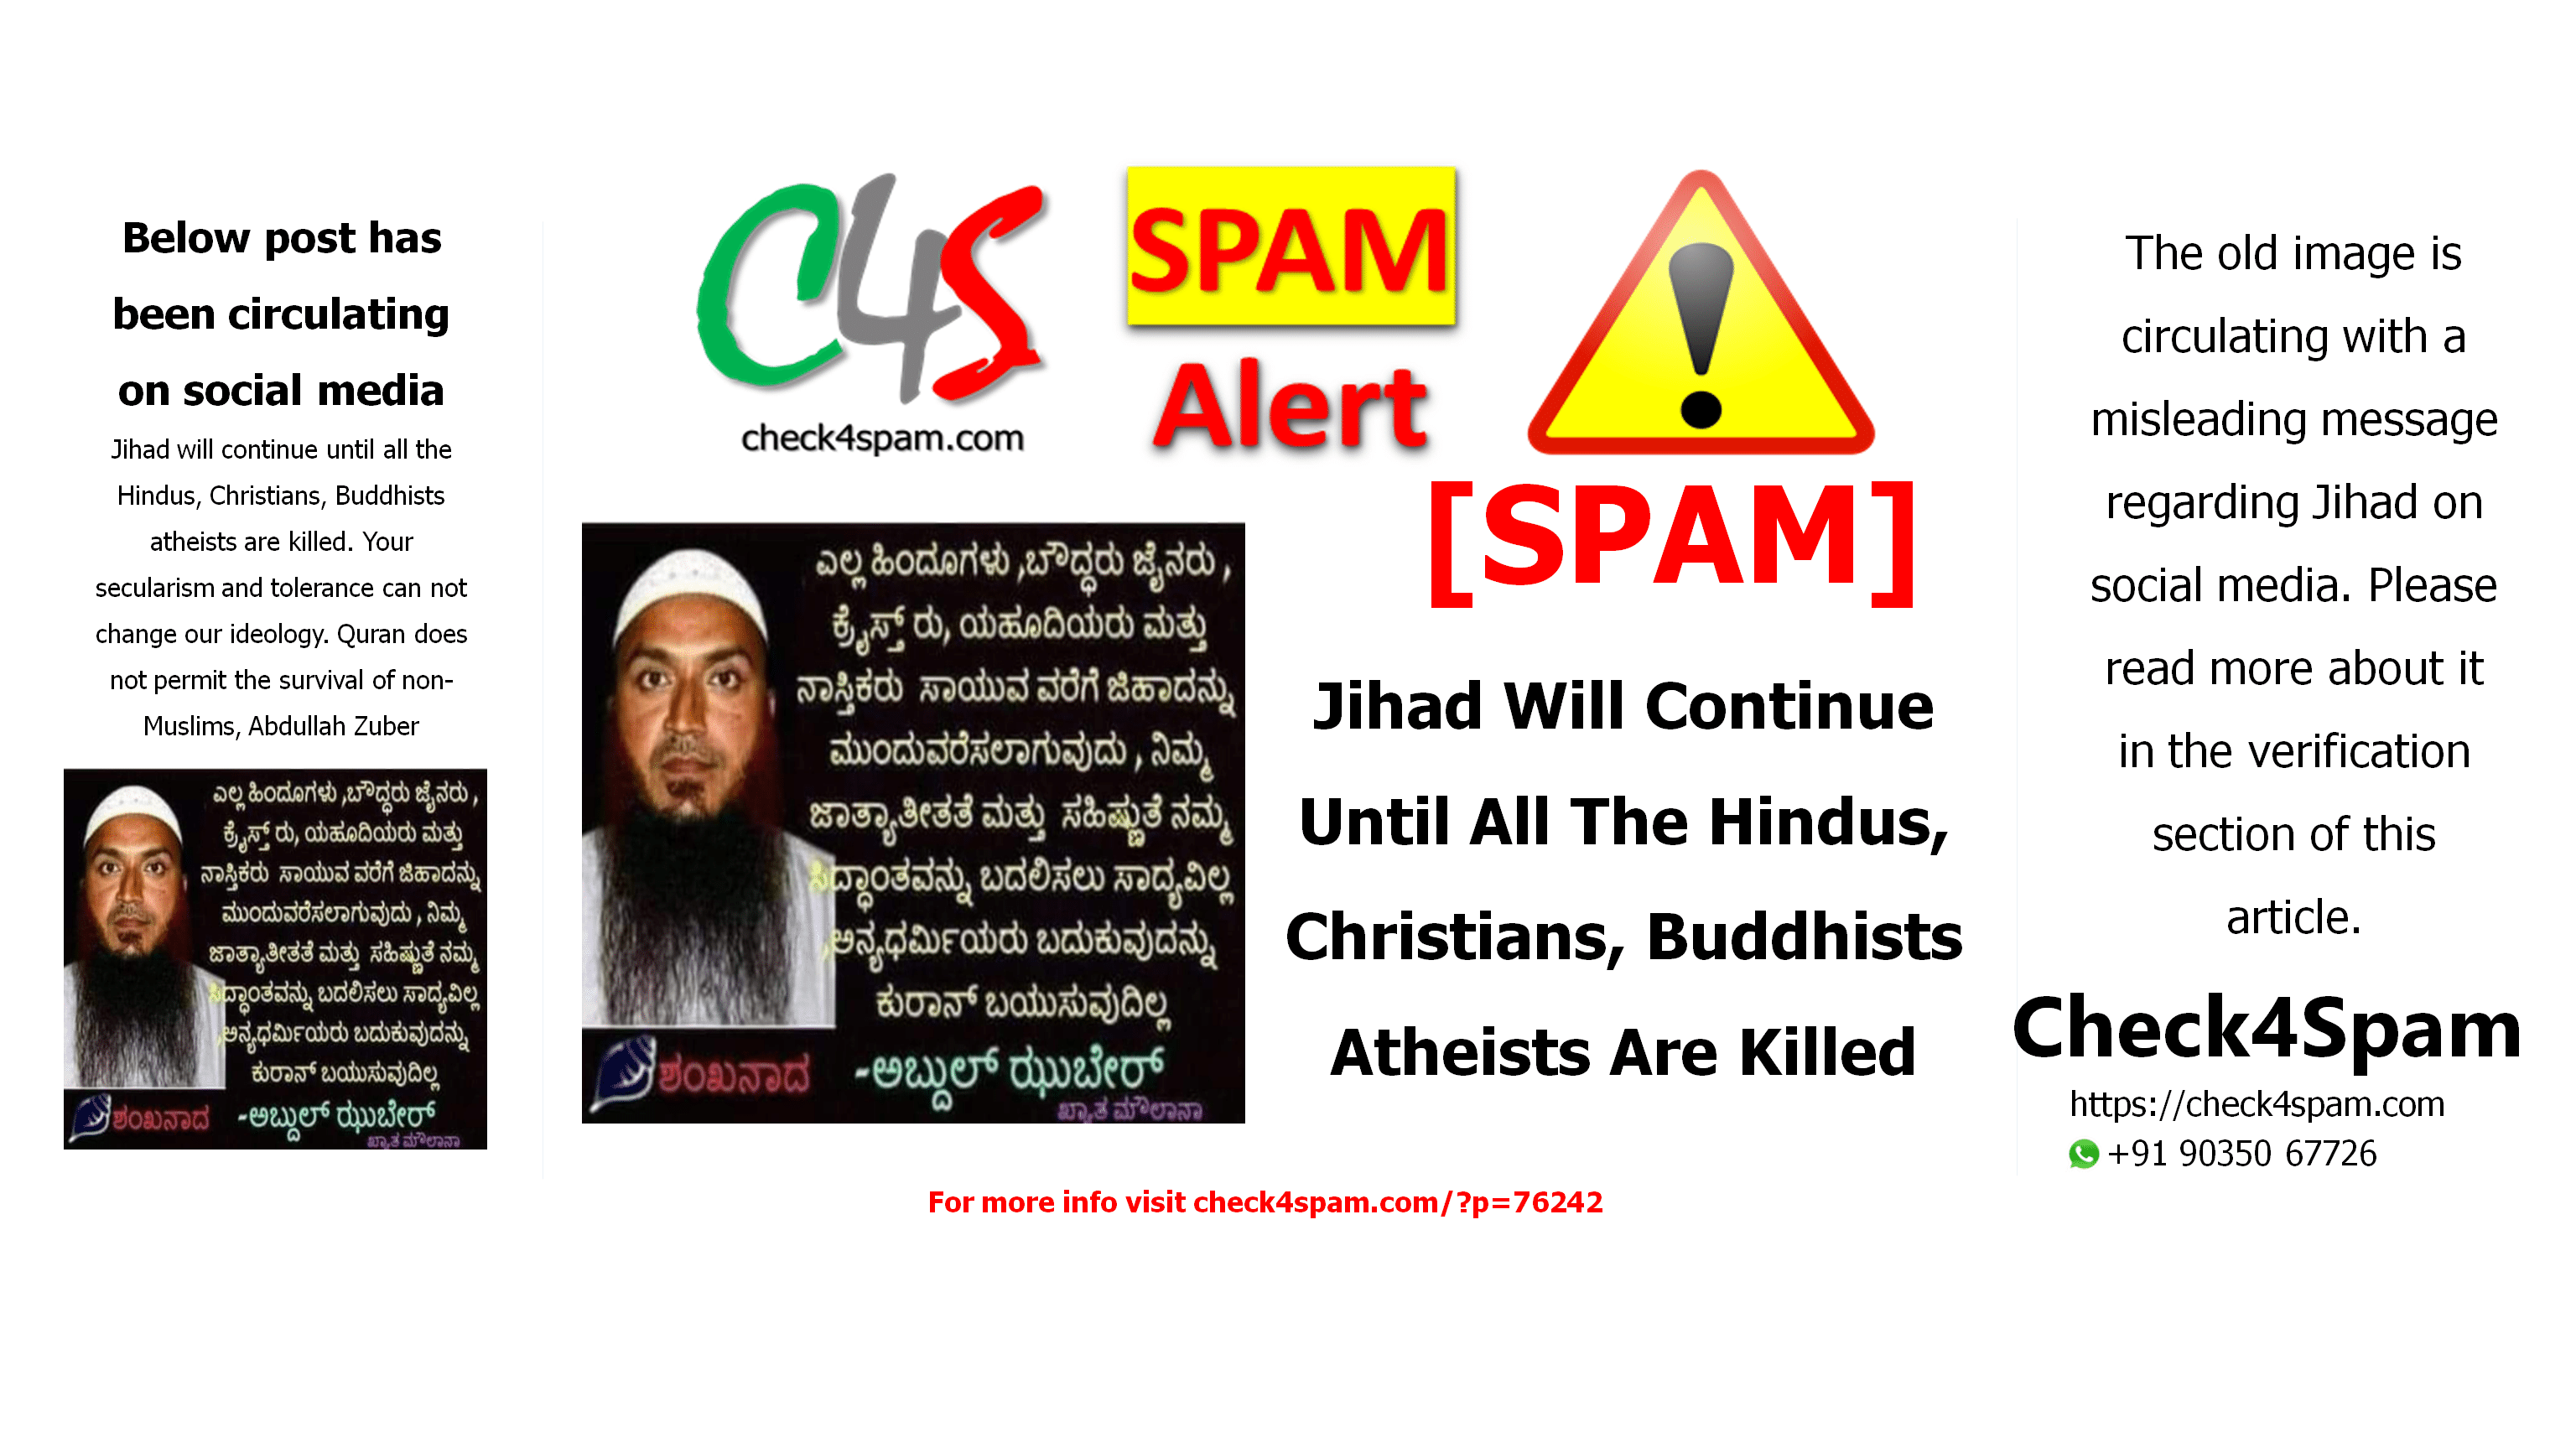 Jihad Will Continue Until All The Hindus, Christians, Buddhists Atheists Are Killed